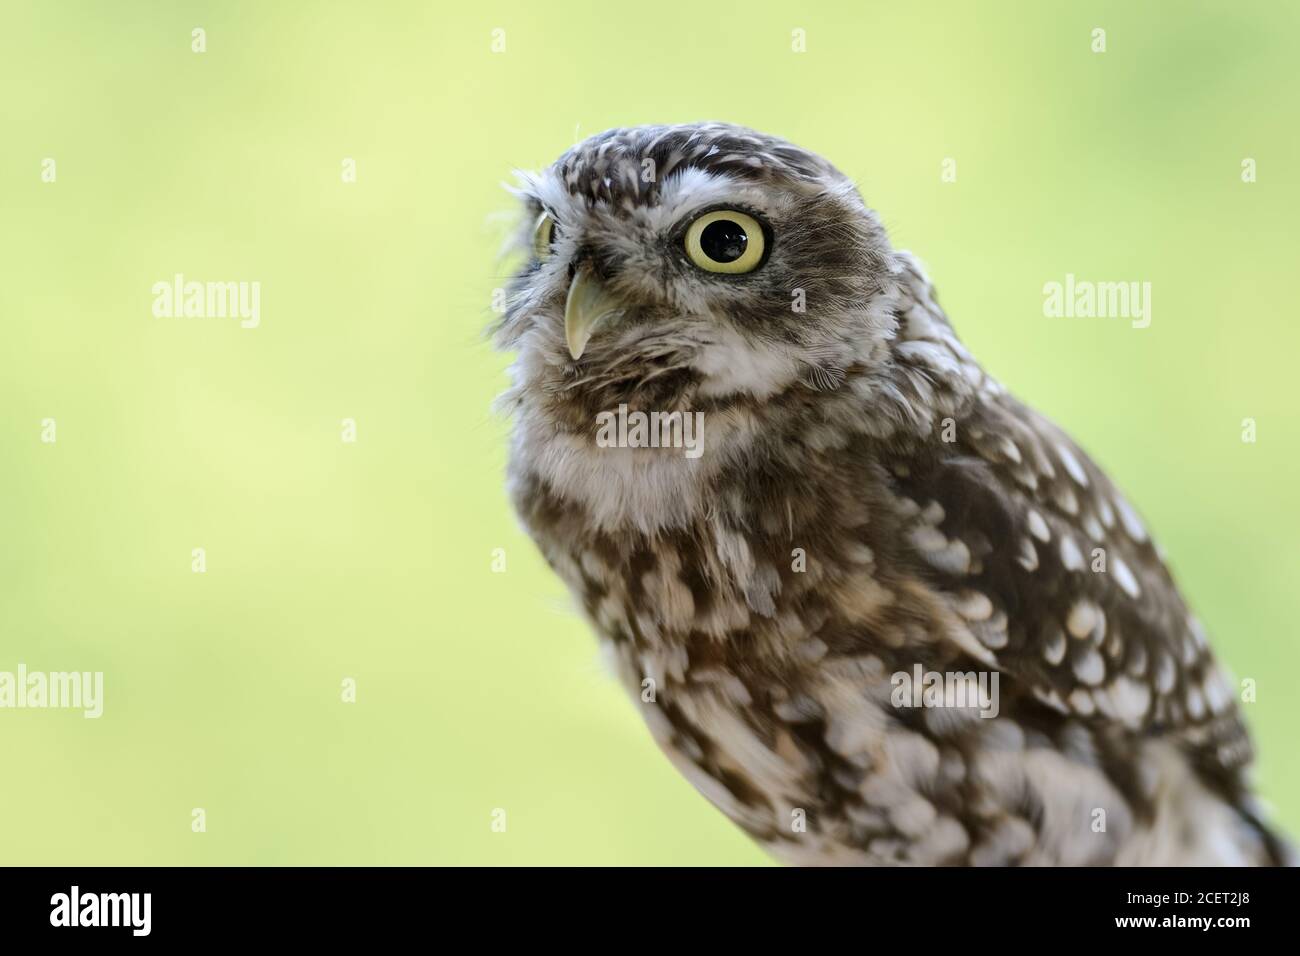 Little Owl / Minervas Owl ( Athene noctua ), small owl species, widespread all over Europe, looks cute and funny. Stock Photo